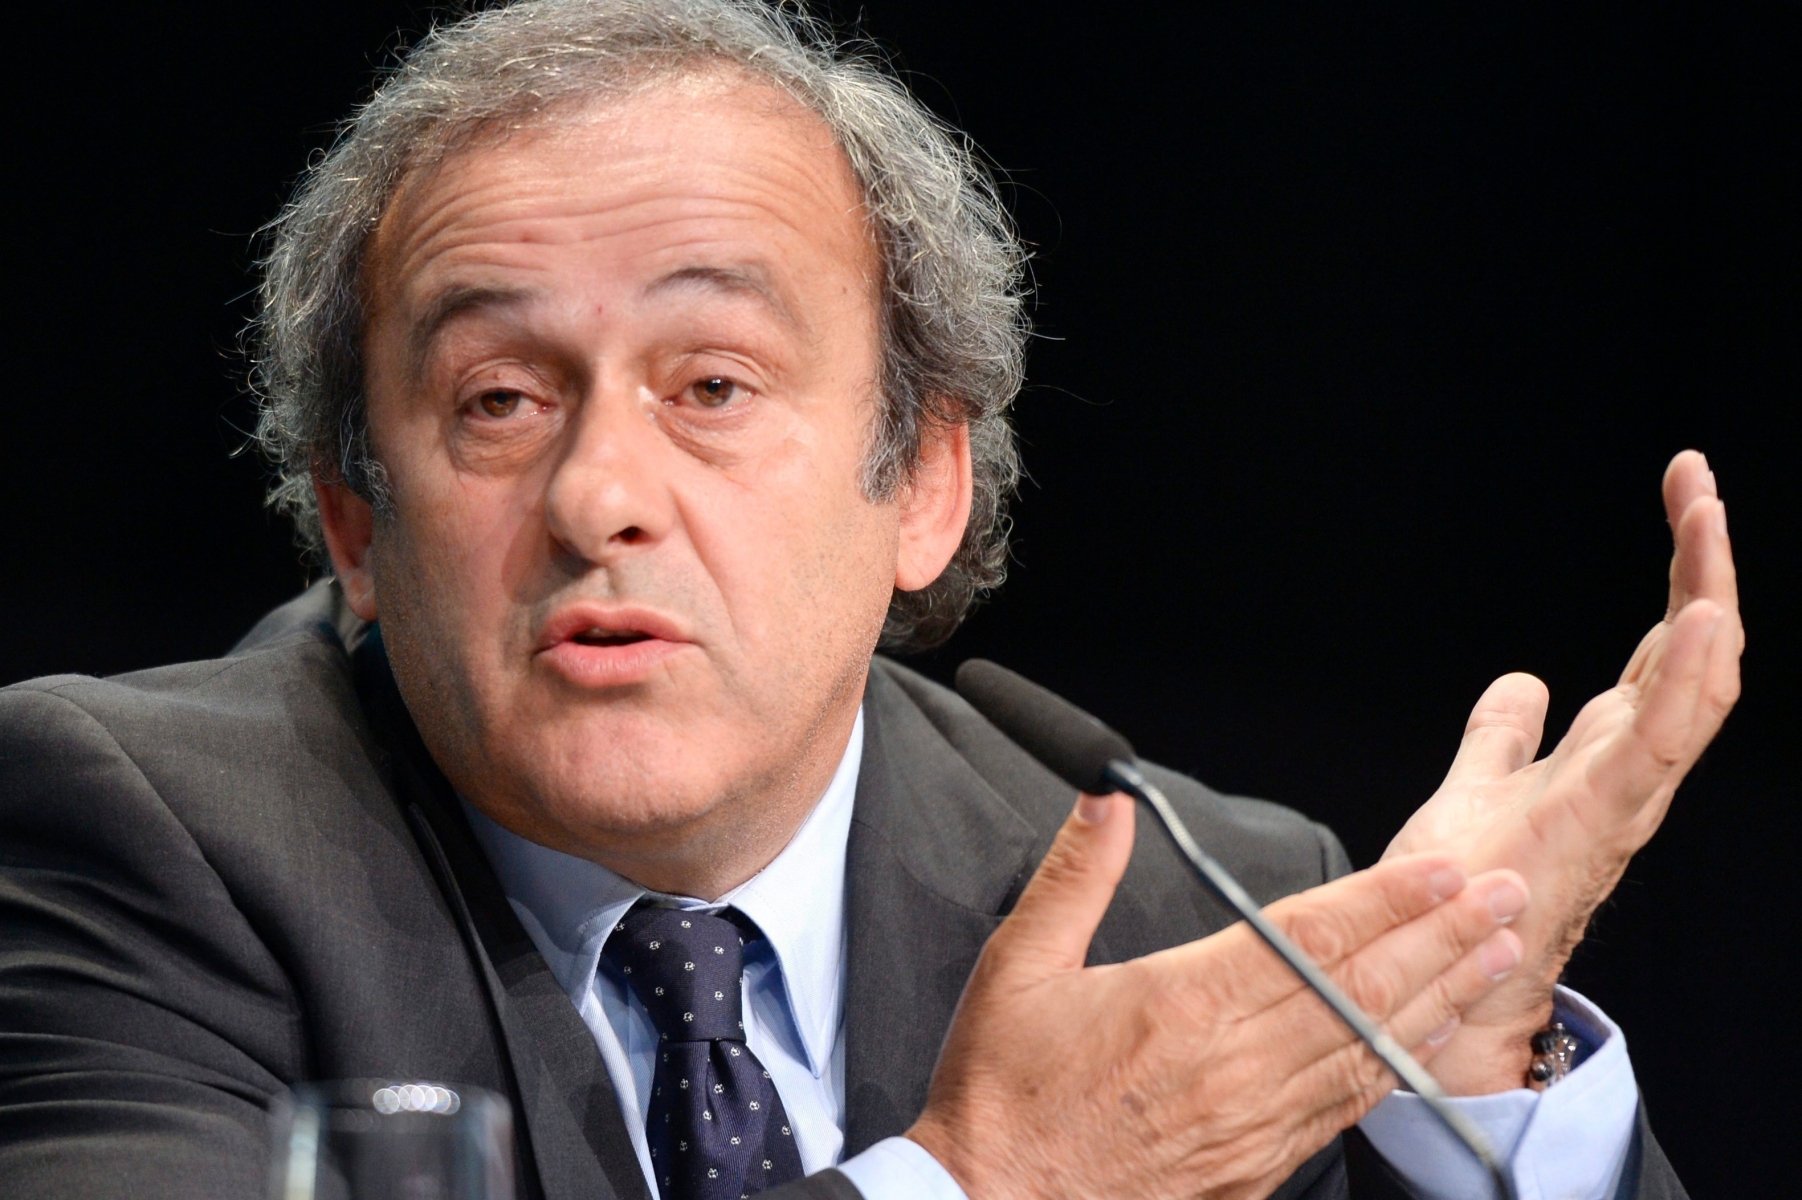 UEFA-President Michel Platini speaks during a press conference after a meeting of the European Soccer federation UEFA in the Kameha Grand Hotel in Glattpark-Zurich, ahead of the FIFA congress, in Zurich, Switzerland, Thursday, May 28, 2015. The FIFA congress with the president's election takes place Friday, May 29, 2015 in Zurich. After yesterday's arresting of seven top Fifa officials on corruption charges, UEFA will decide today whether to boycott FIFAÄôs annual Congress. (KEYSTONE/Walter Bieri) SWITZERLAND SOCCER FIFA UEFA